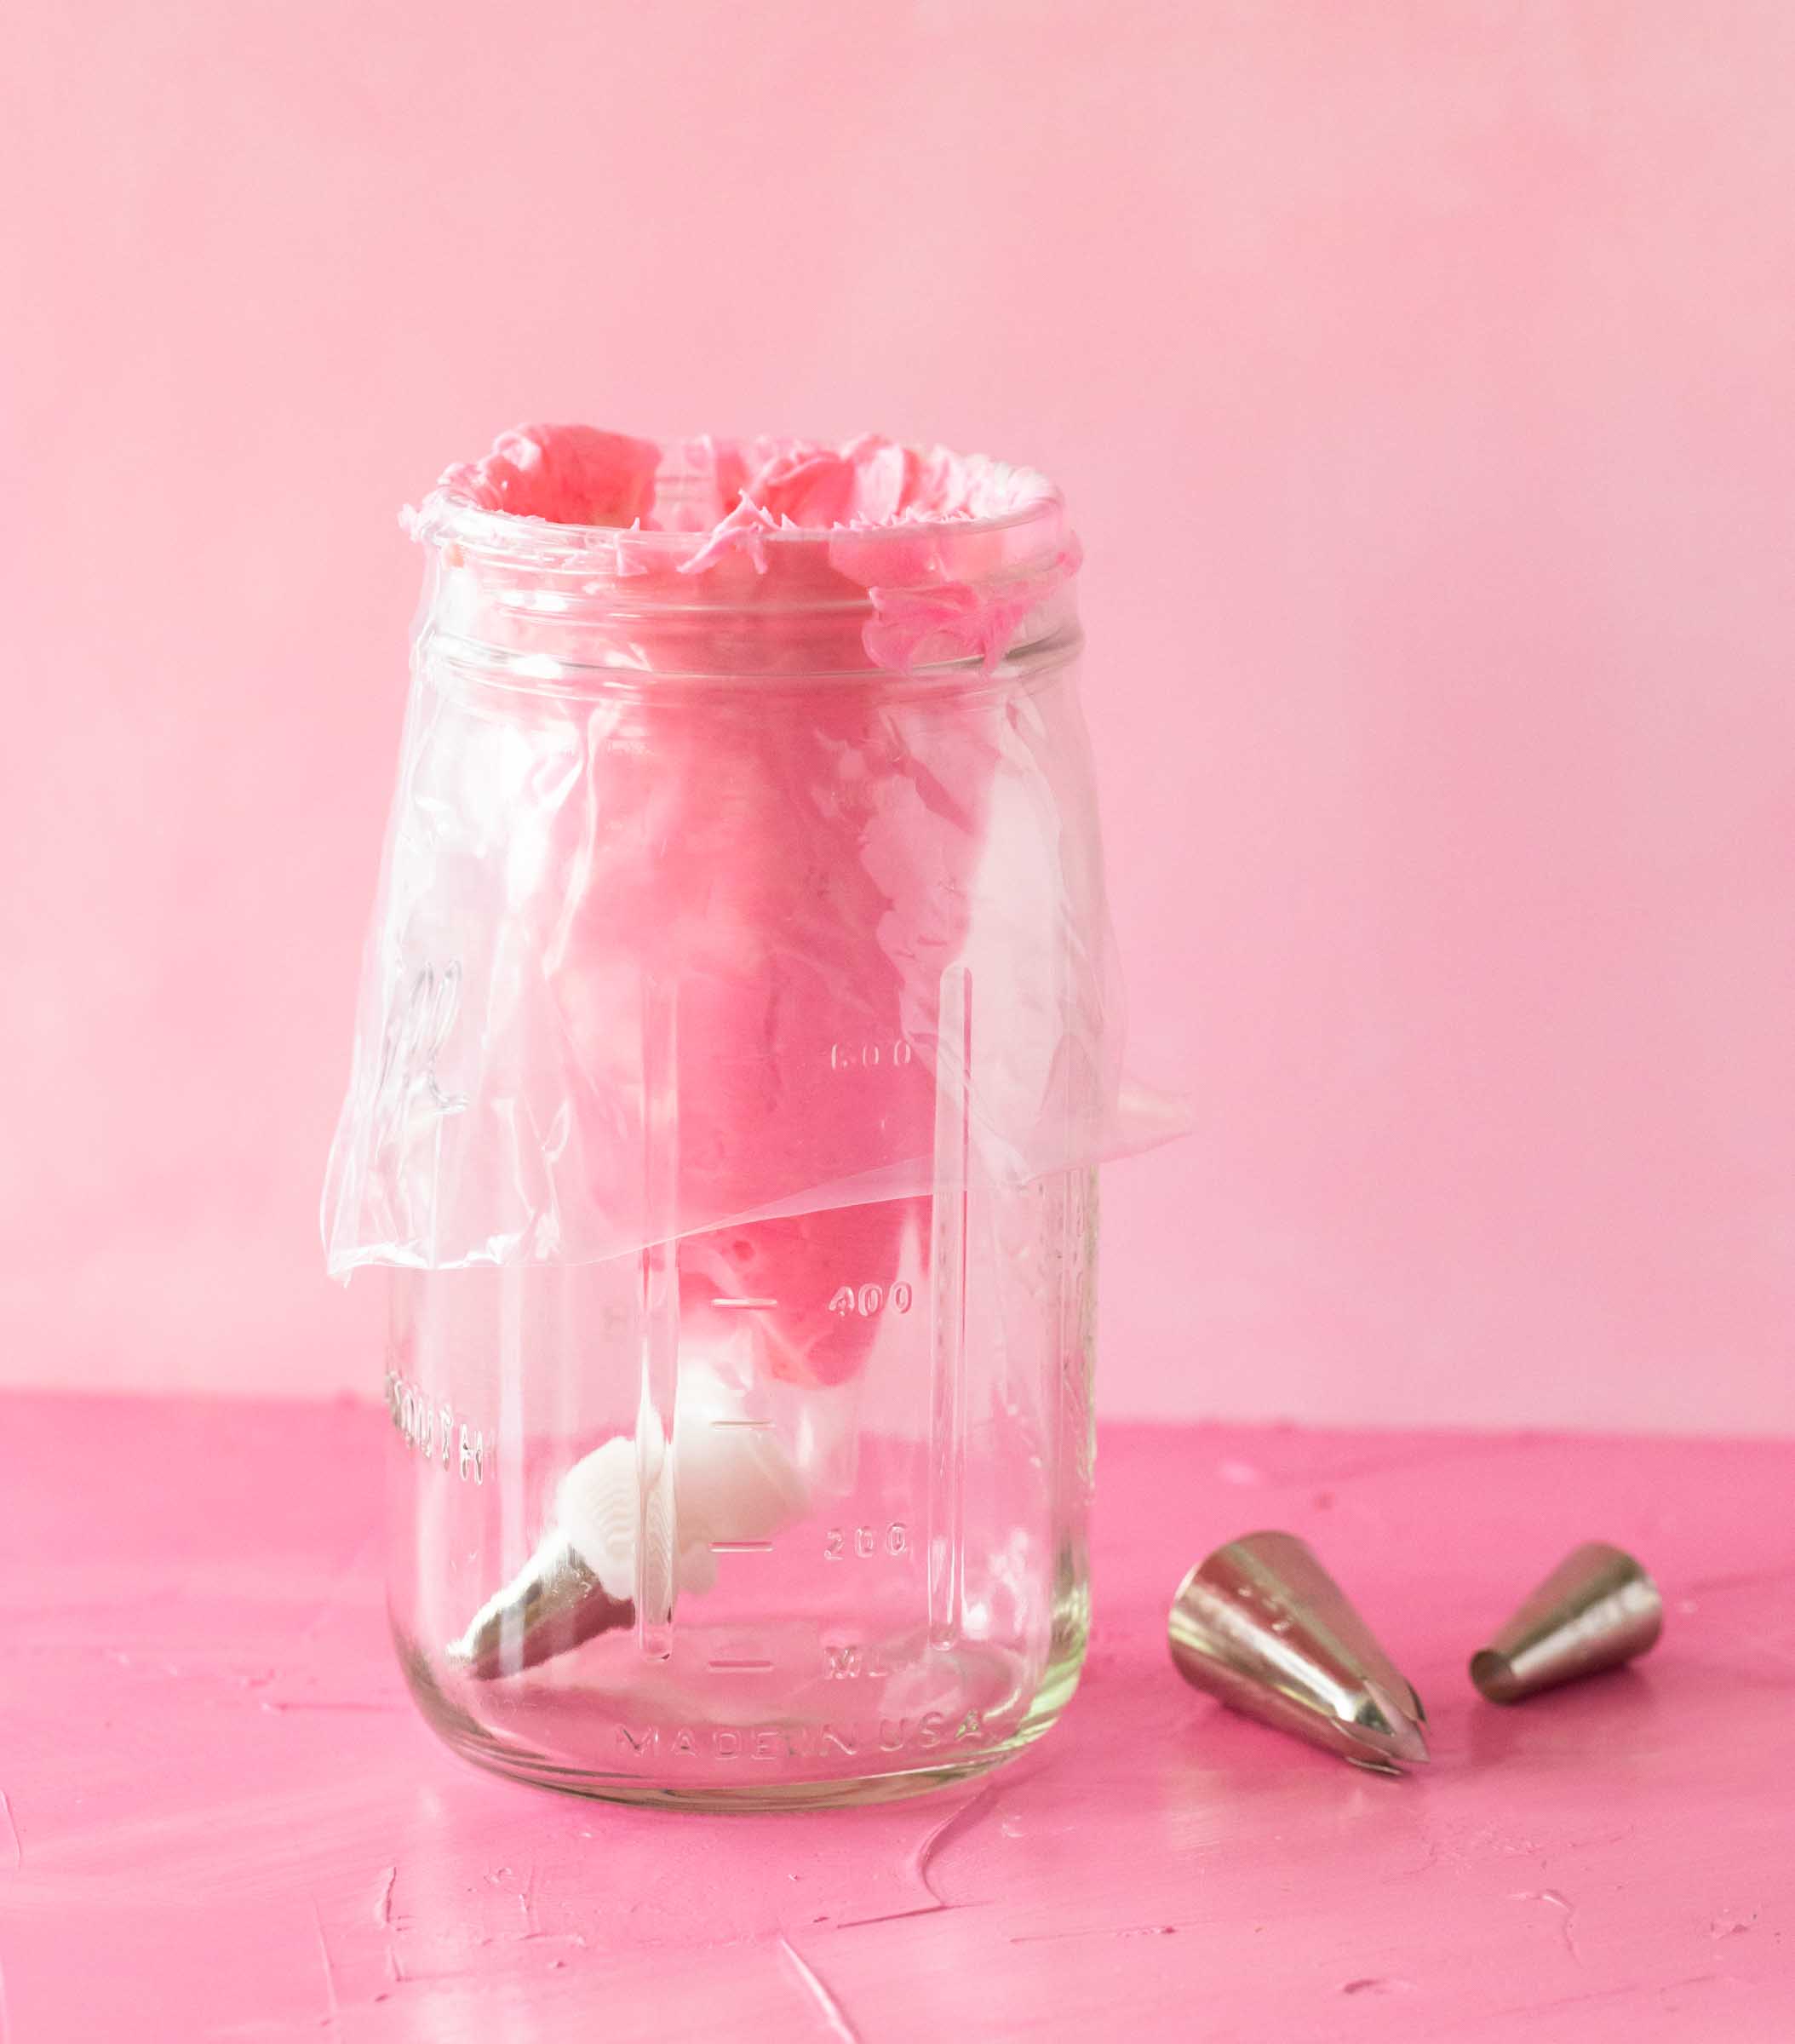 A piping bag in a jar with tips.